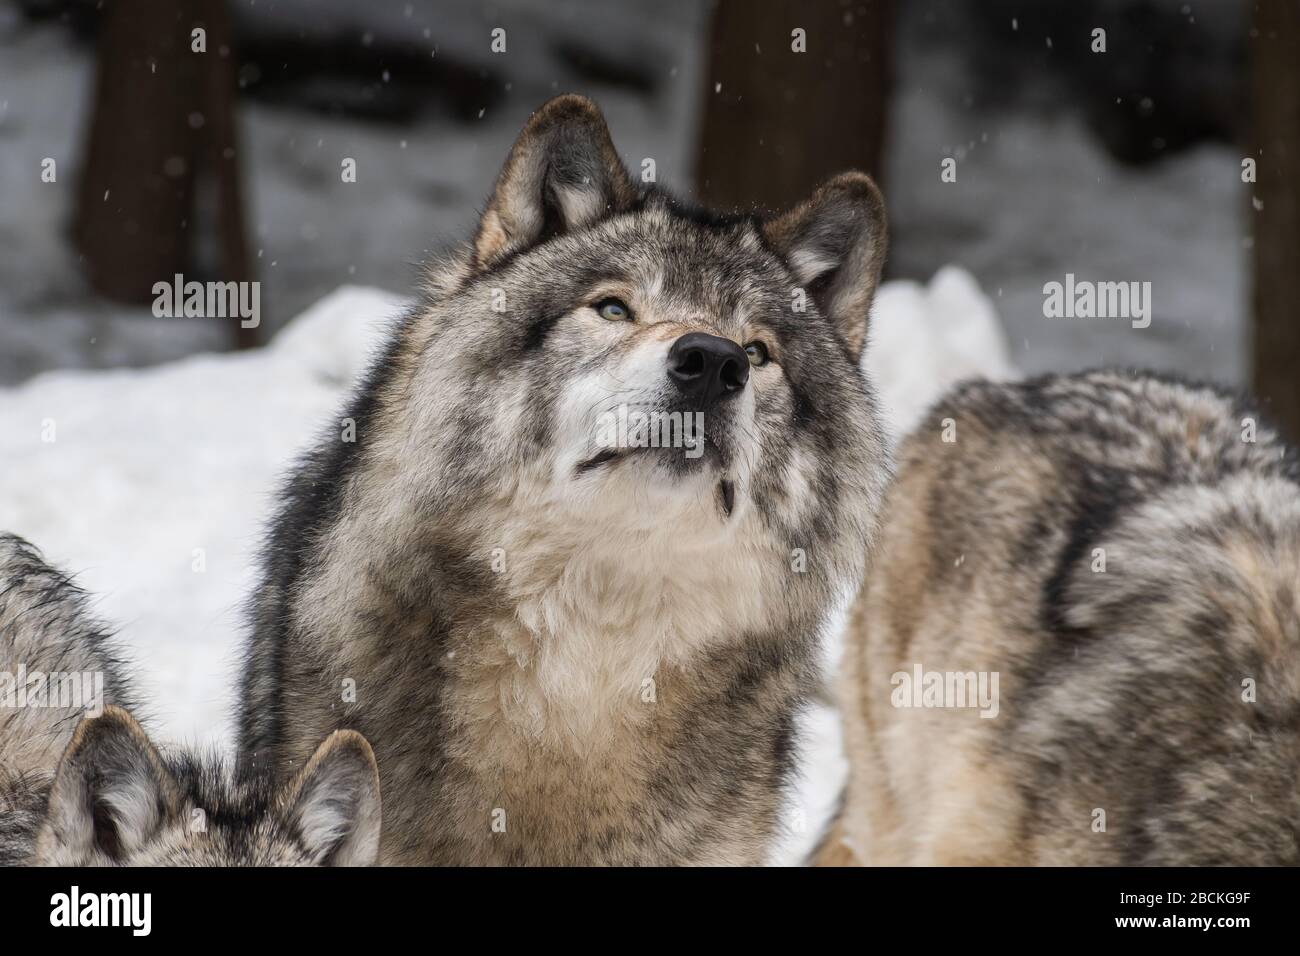 Big grey wolf staring in the distance with a blurry snow background. Leader of the pack. Stock Photo